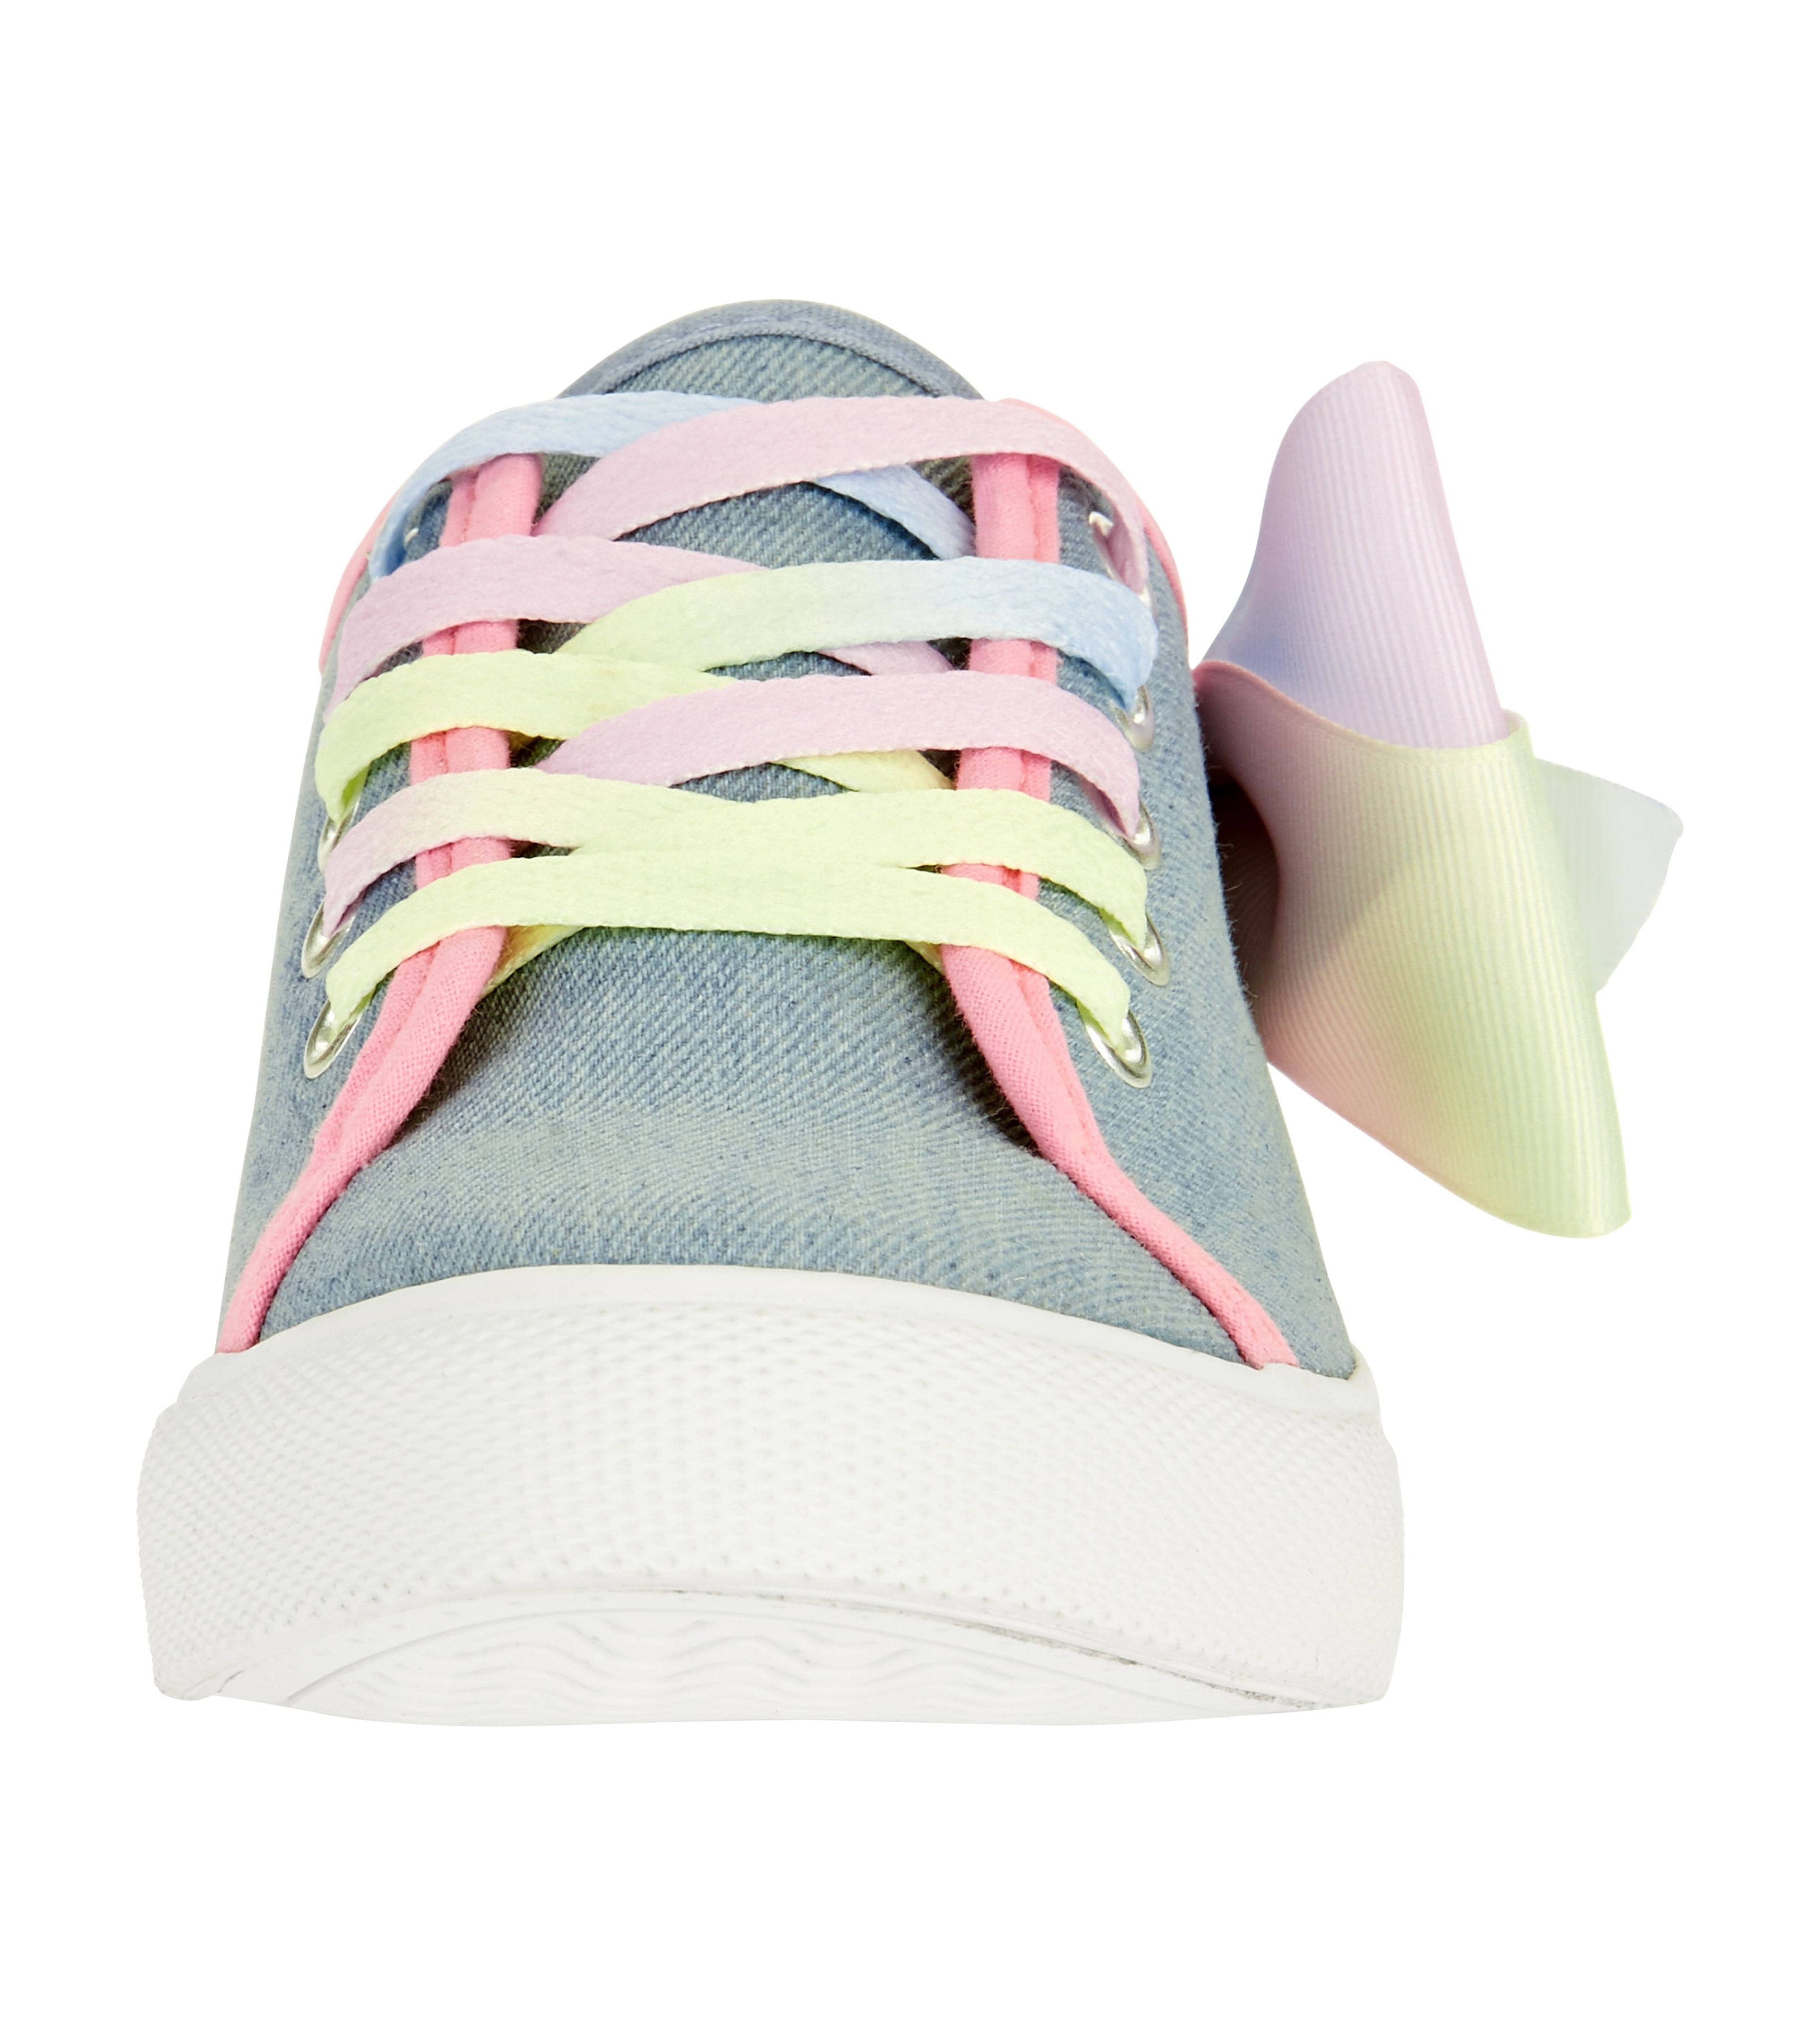 Jojo Siwa Girl's Denim Lace Up Sneakers With Bow - image 3 of 7